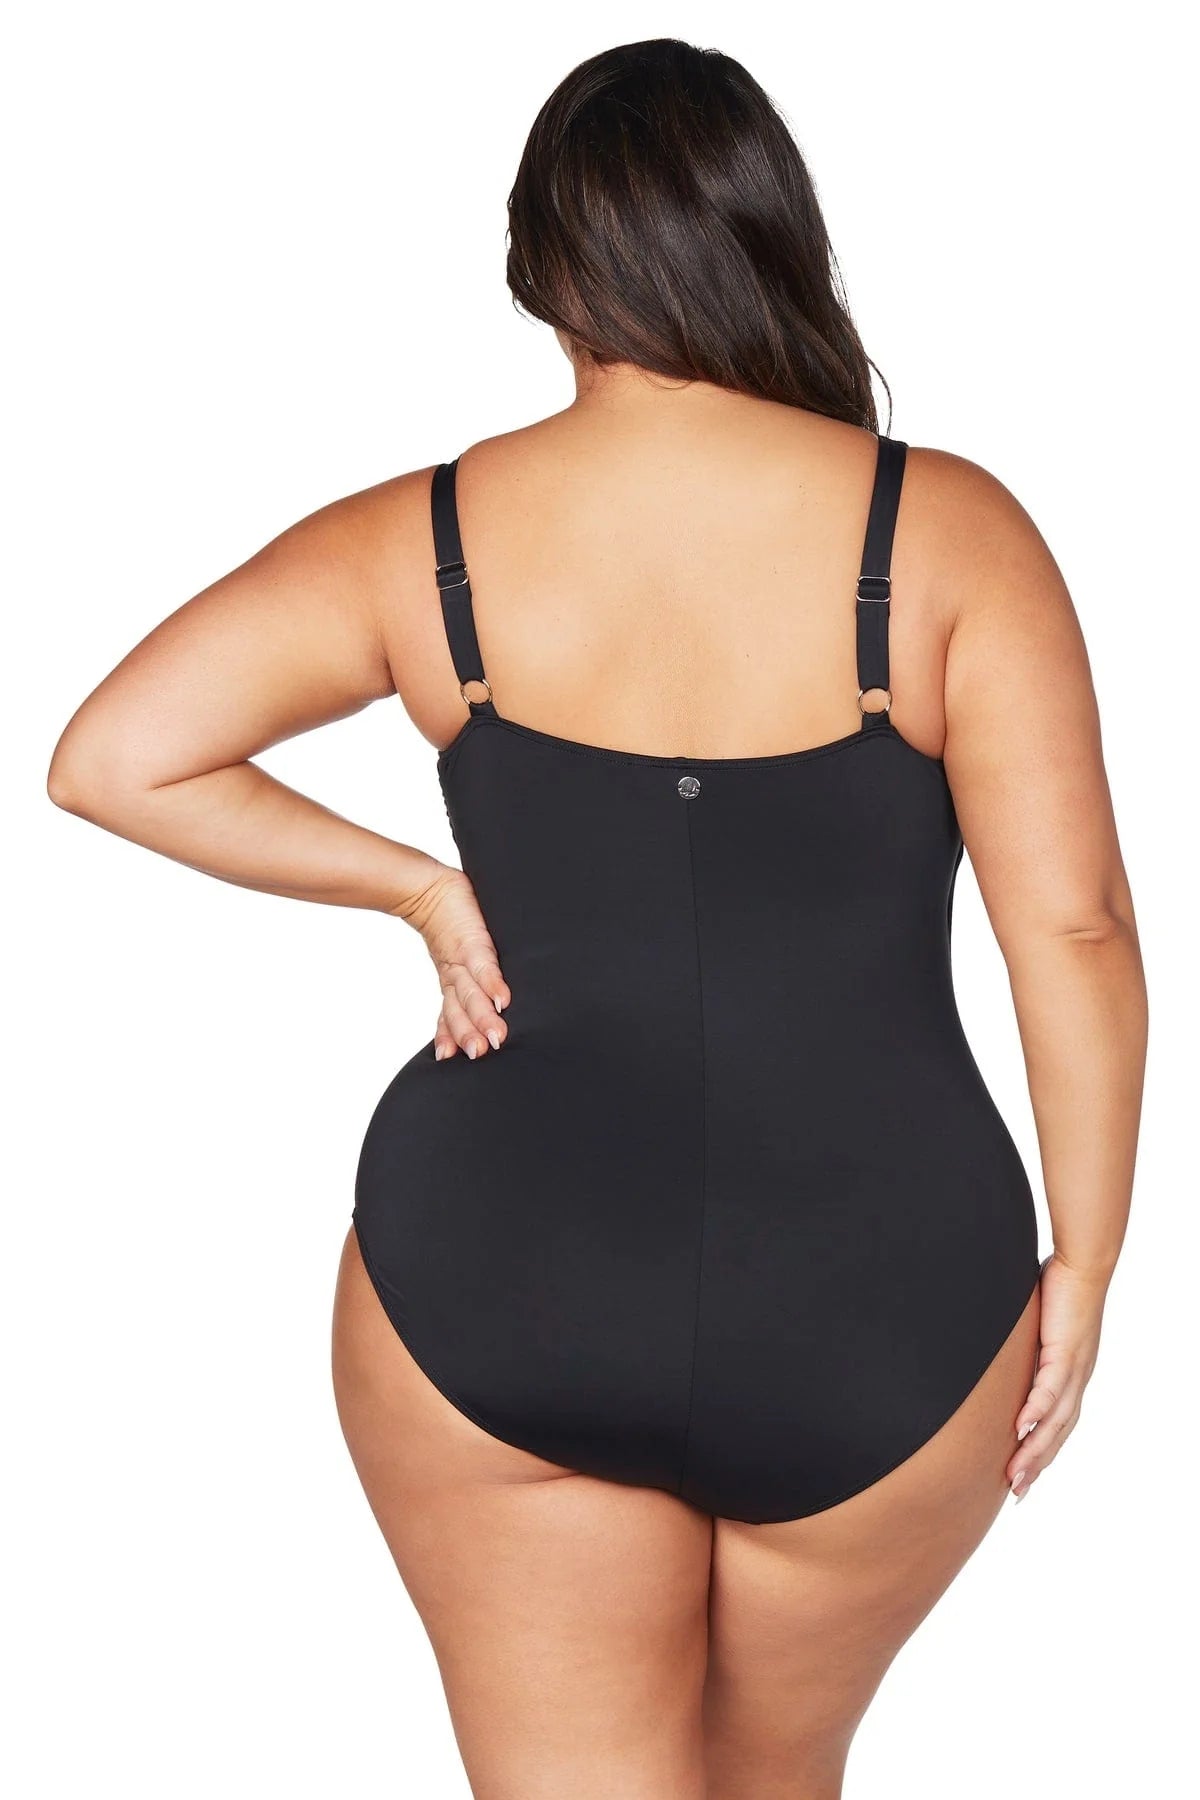 Artesands Hues Hayes Underwire One Piece – FA 14 plus